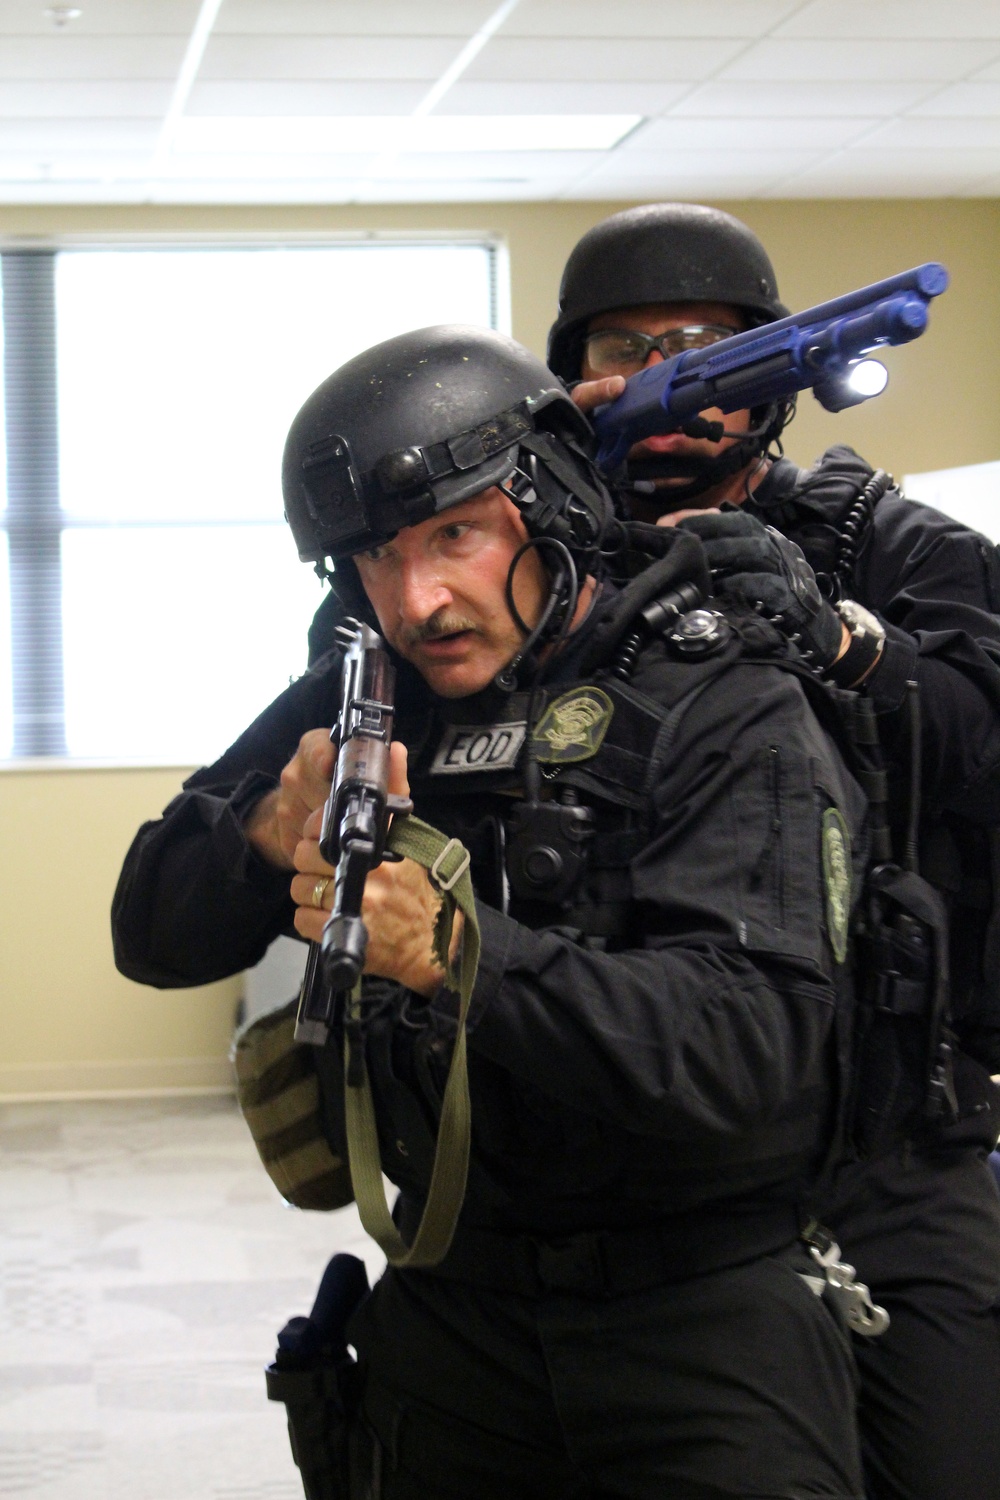 Run, hide or fight: Wildcats train in surviving an active shooter